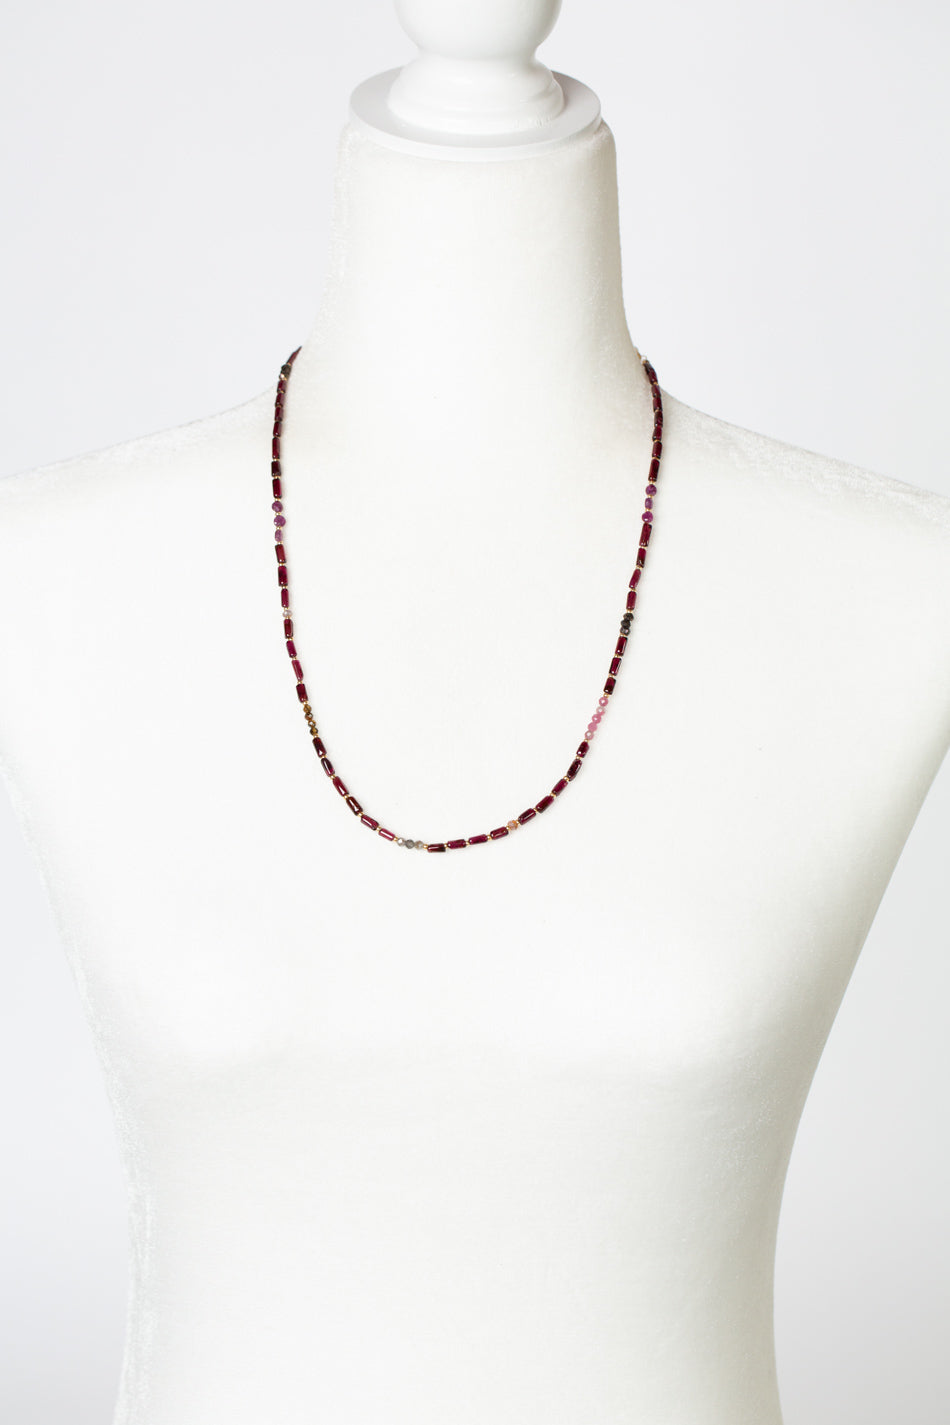 Decadence 22.5-24.5" Ruby, Garnet, Spinel Simple Necklace